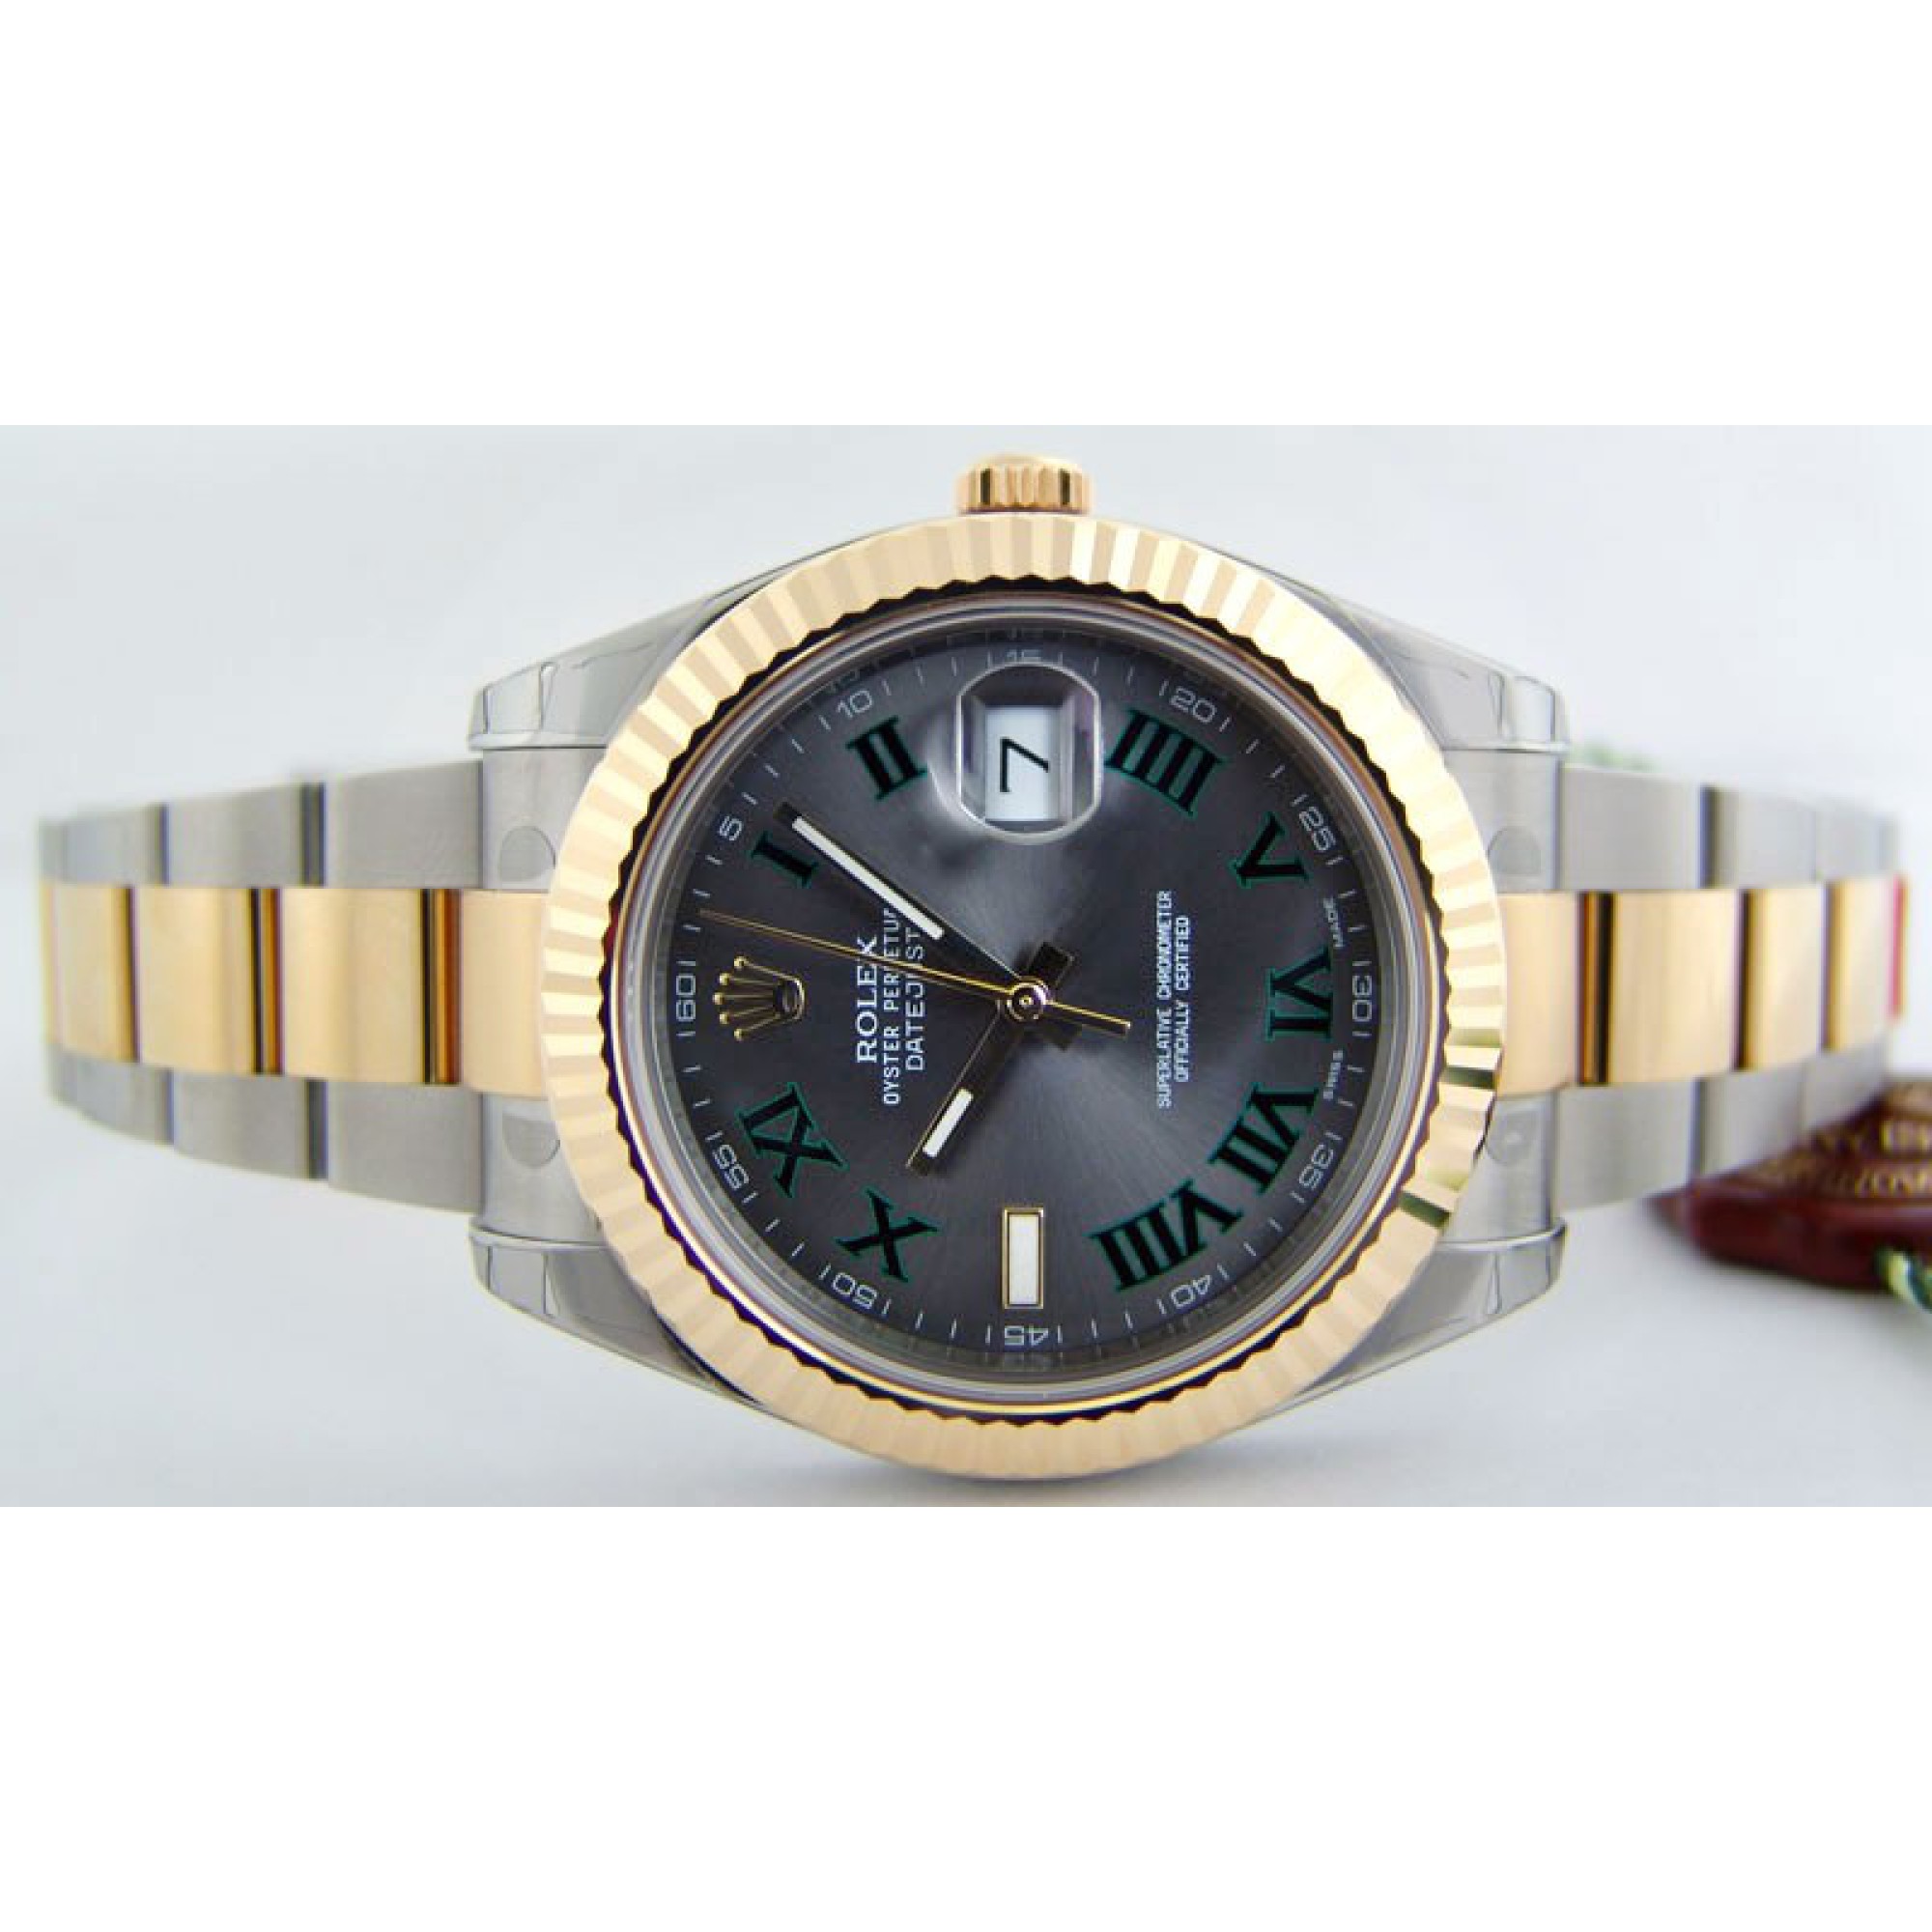 Rolex - Datejust II 41mm - Steel and Yellow Gold - Fluted Bezel (11633 –  Watch Brands Direct - Luxury Watches at the Largest Discounts